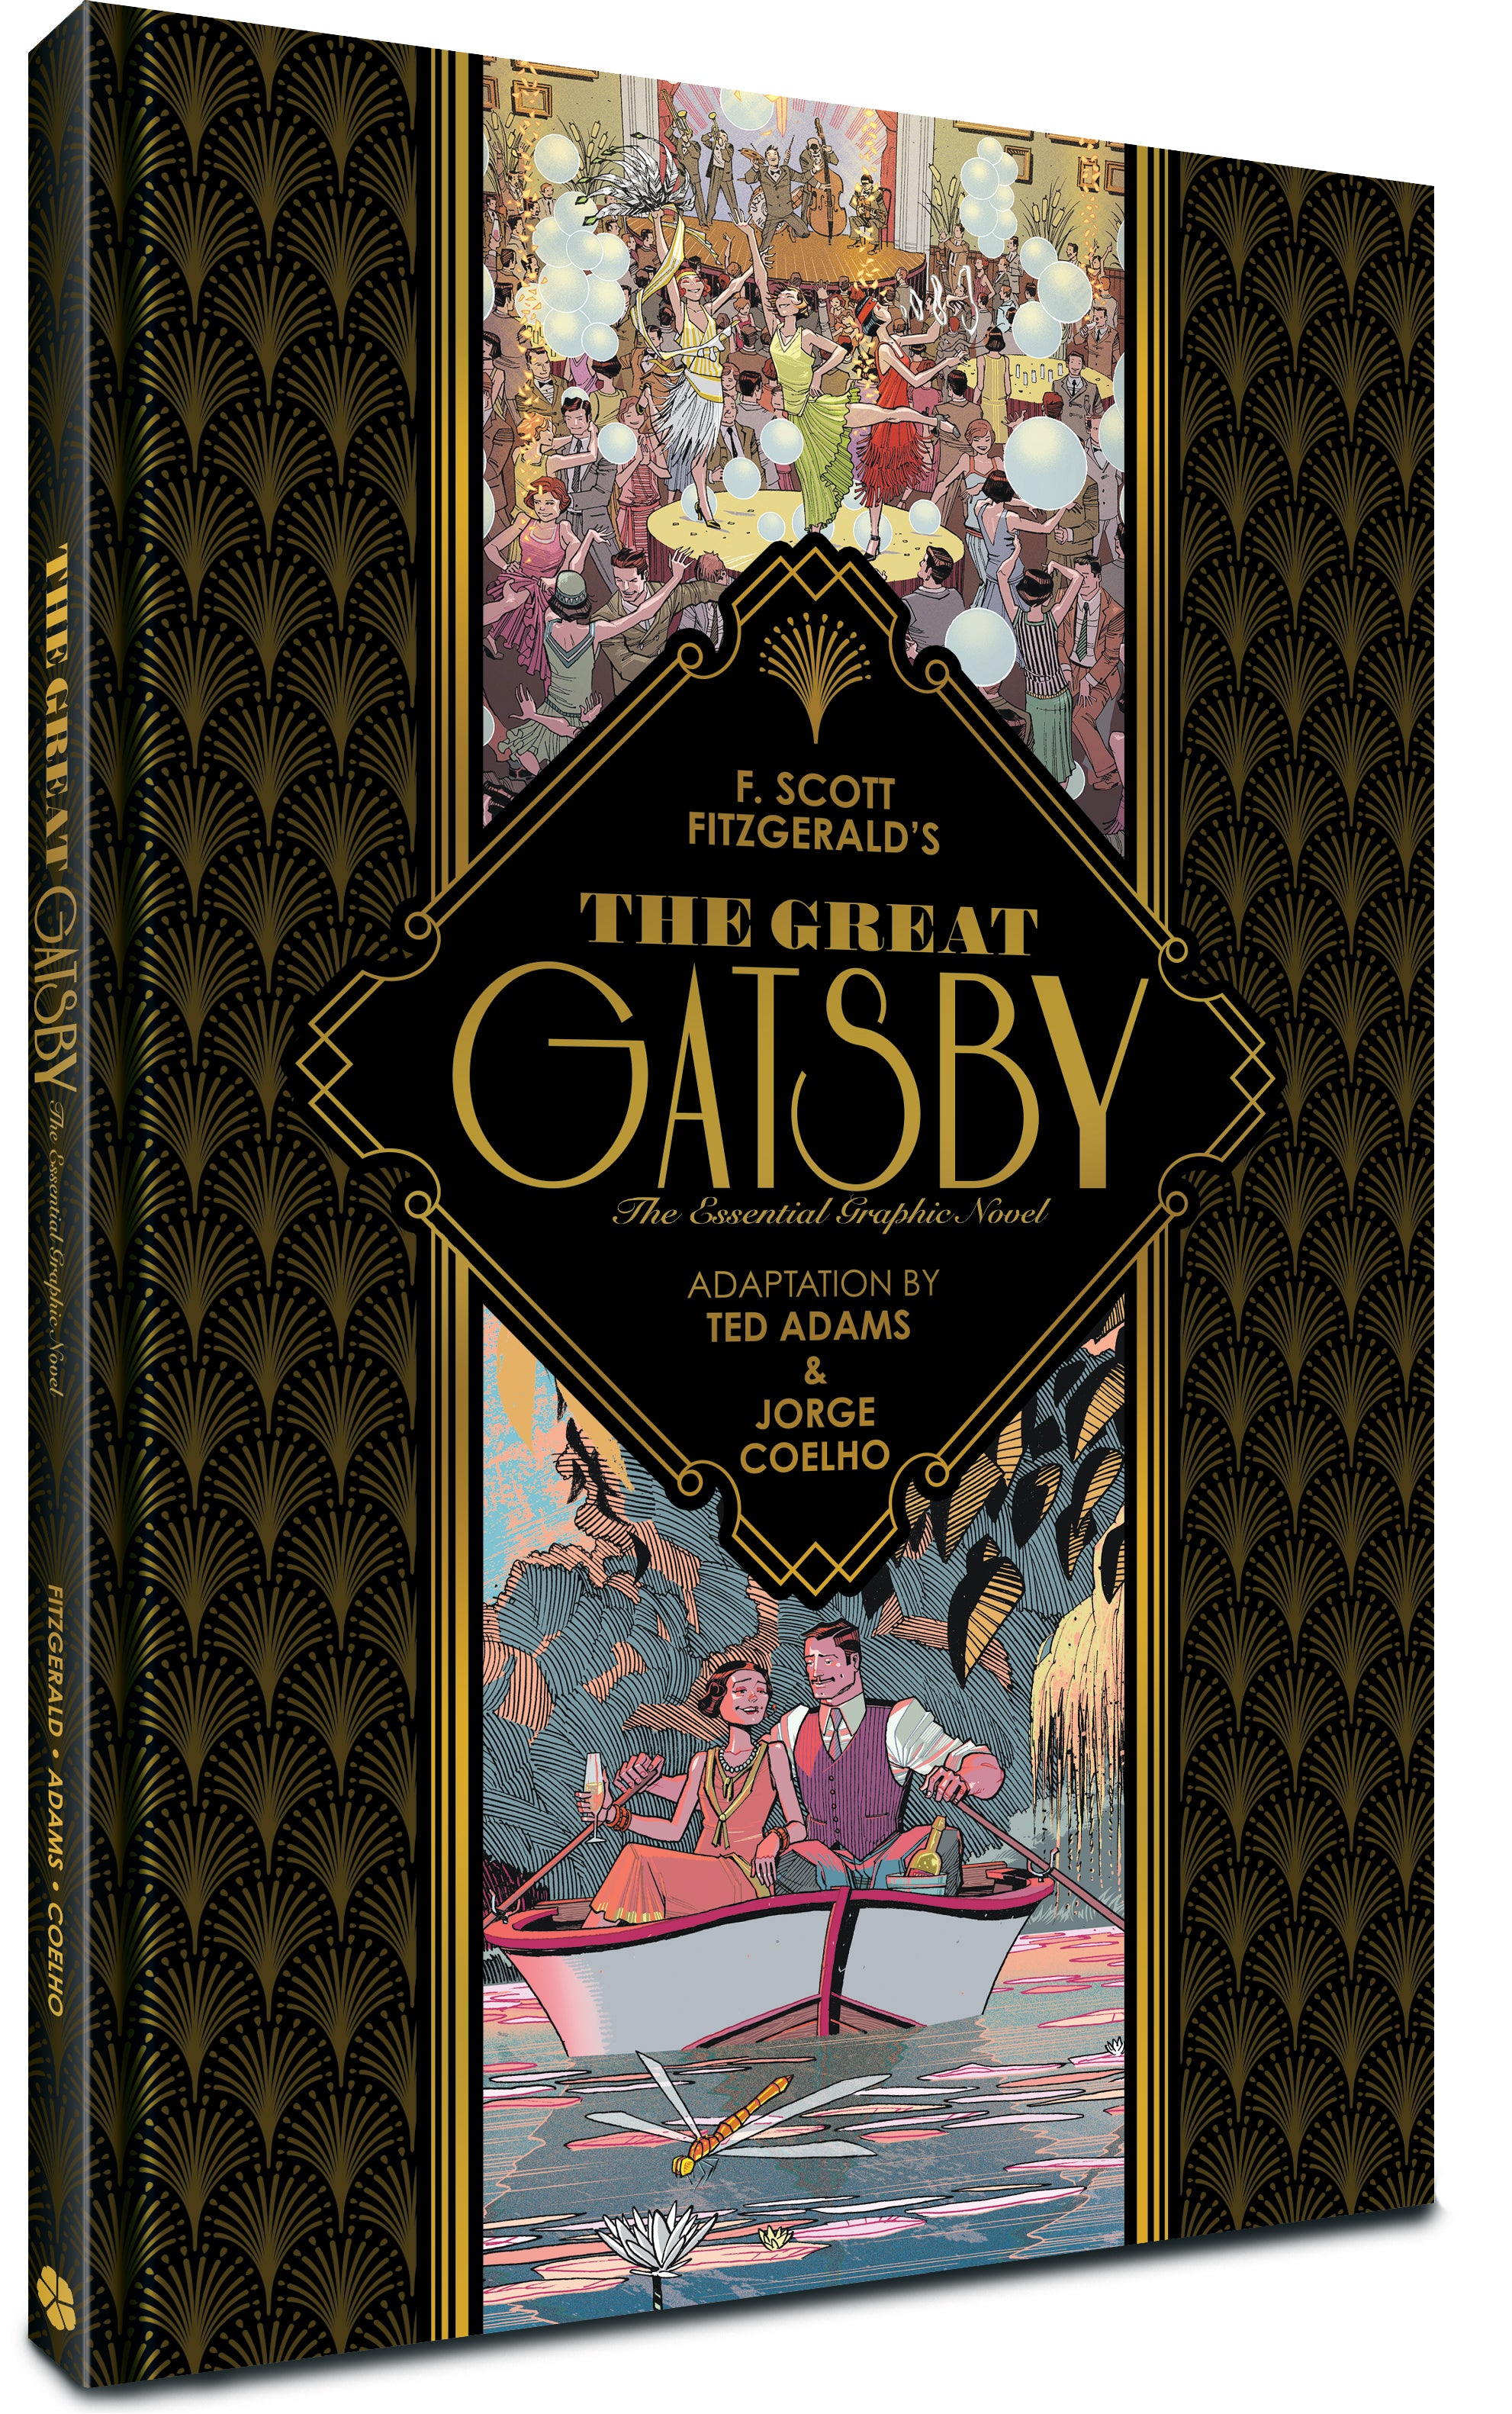 GREAT GATSBY HARDCOVER